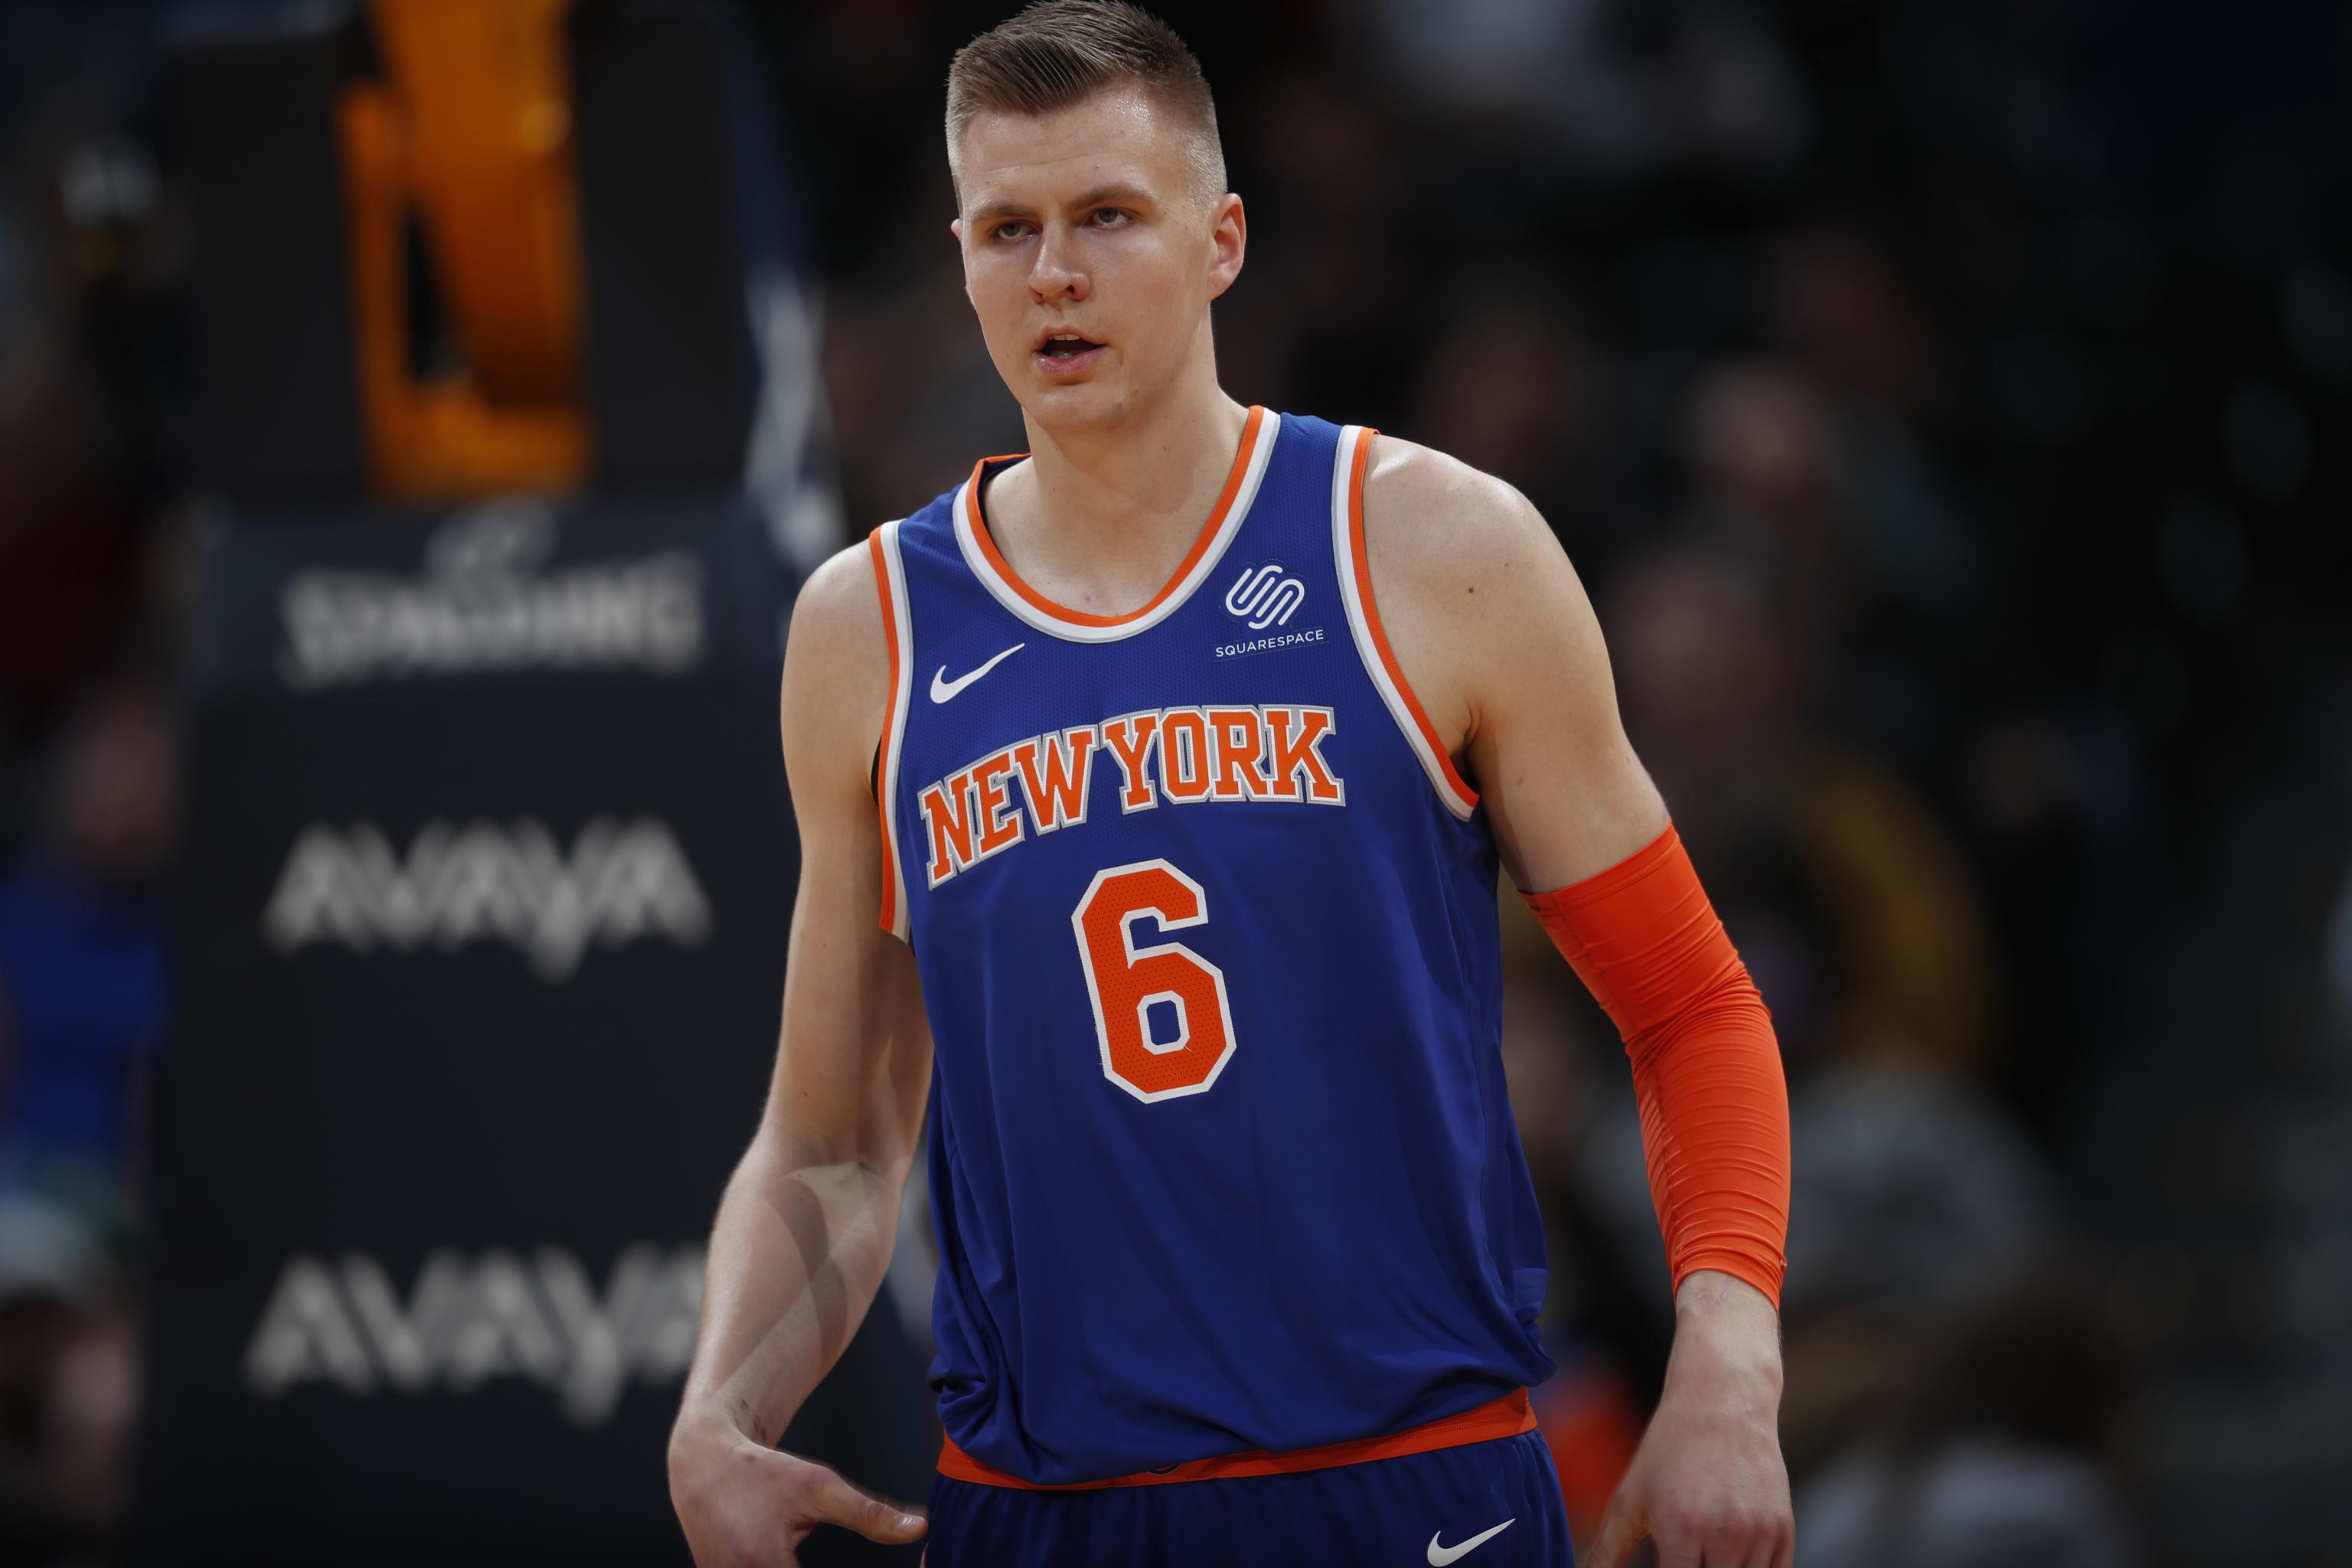 Nba Rumors Kristaps Porzingis Concerned By Knicks Play Wants Clarity On Role Bleacher Report Latest News Videos And Highlights